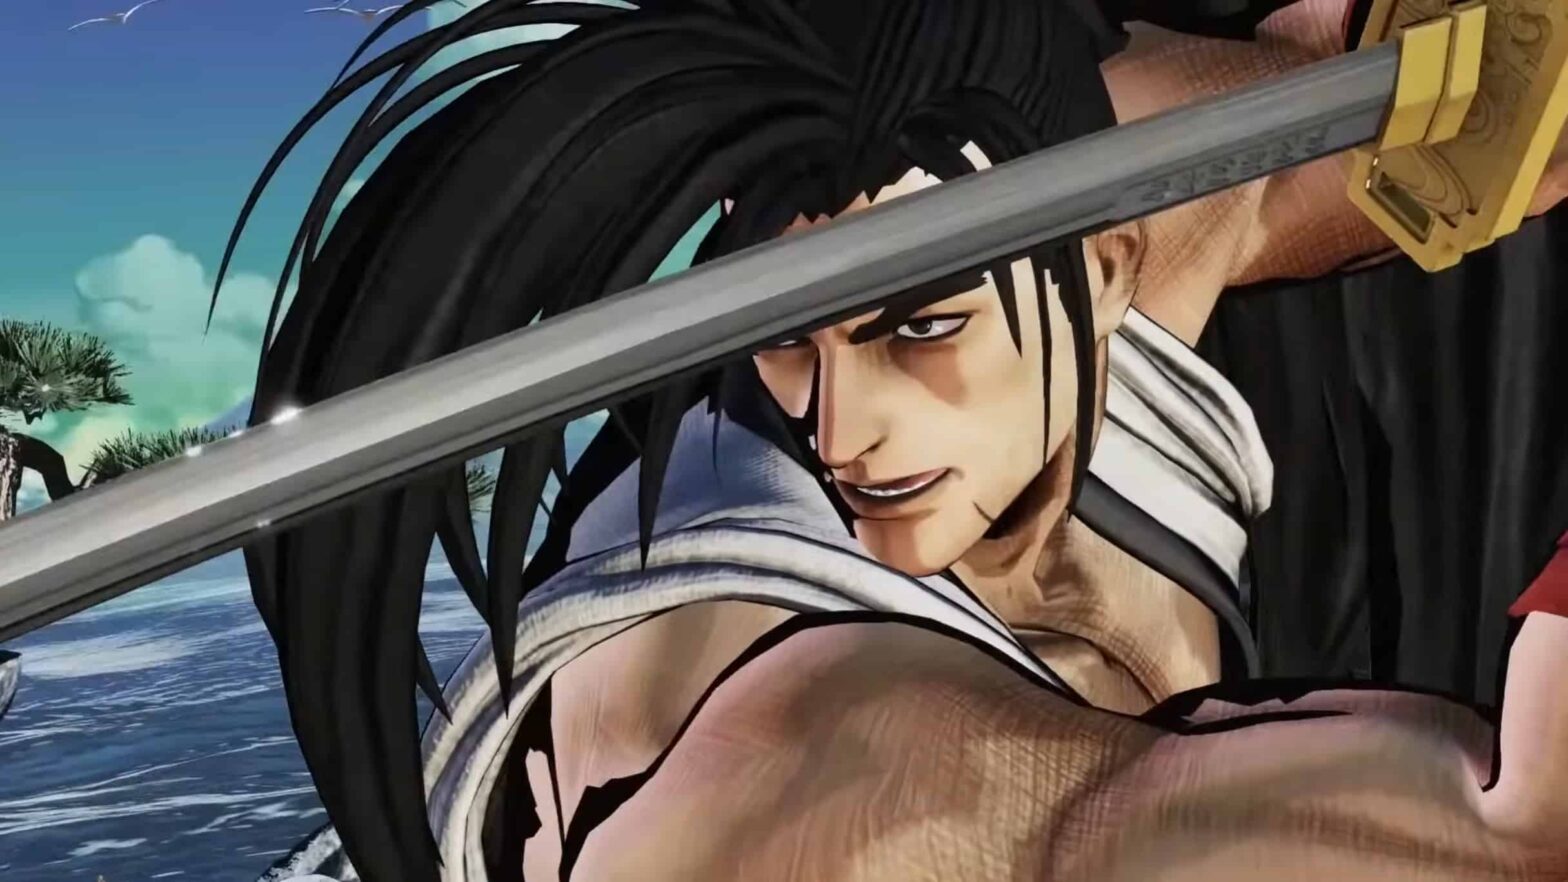 Samurai Shodown gets an Android release as a Netflix game